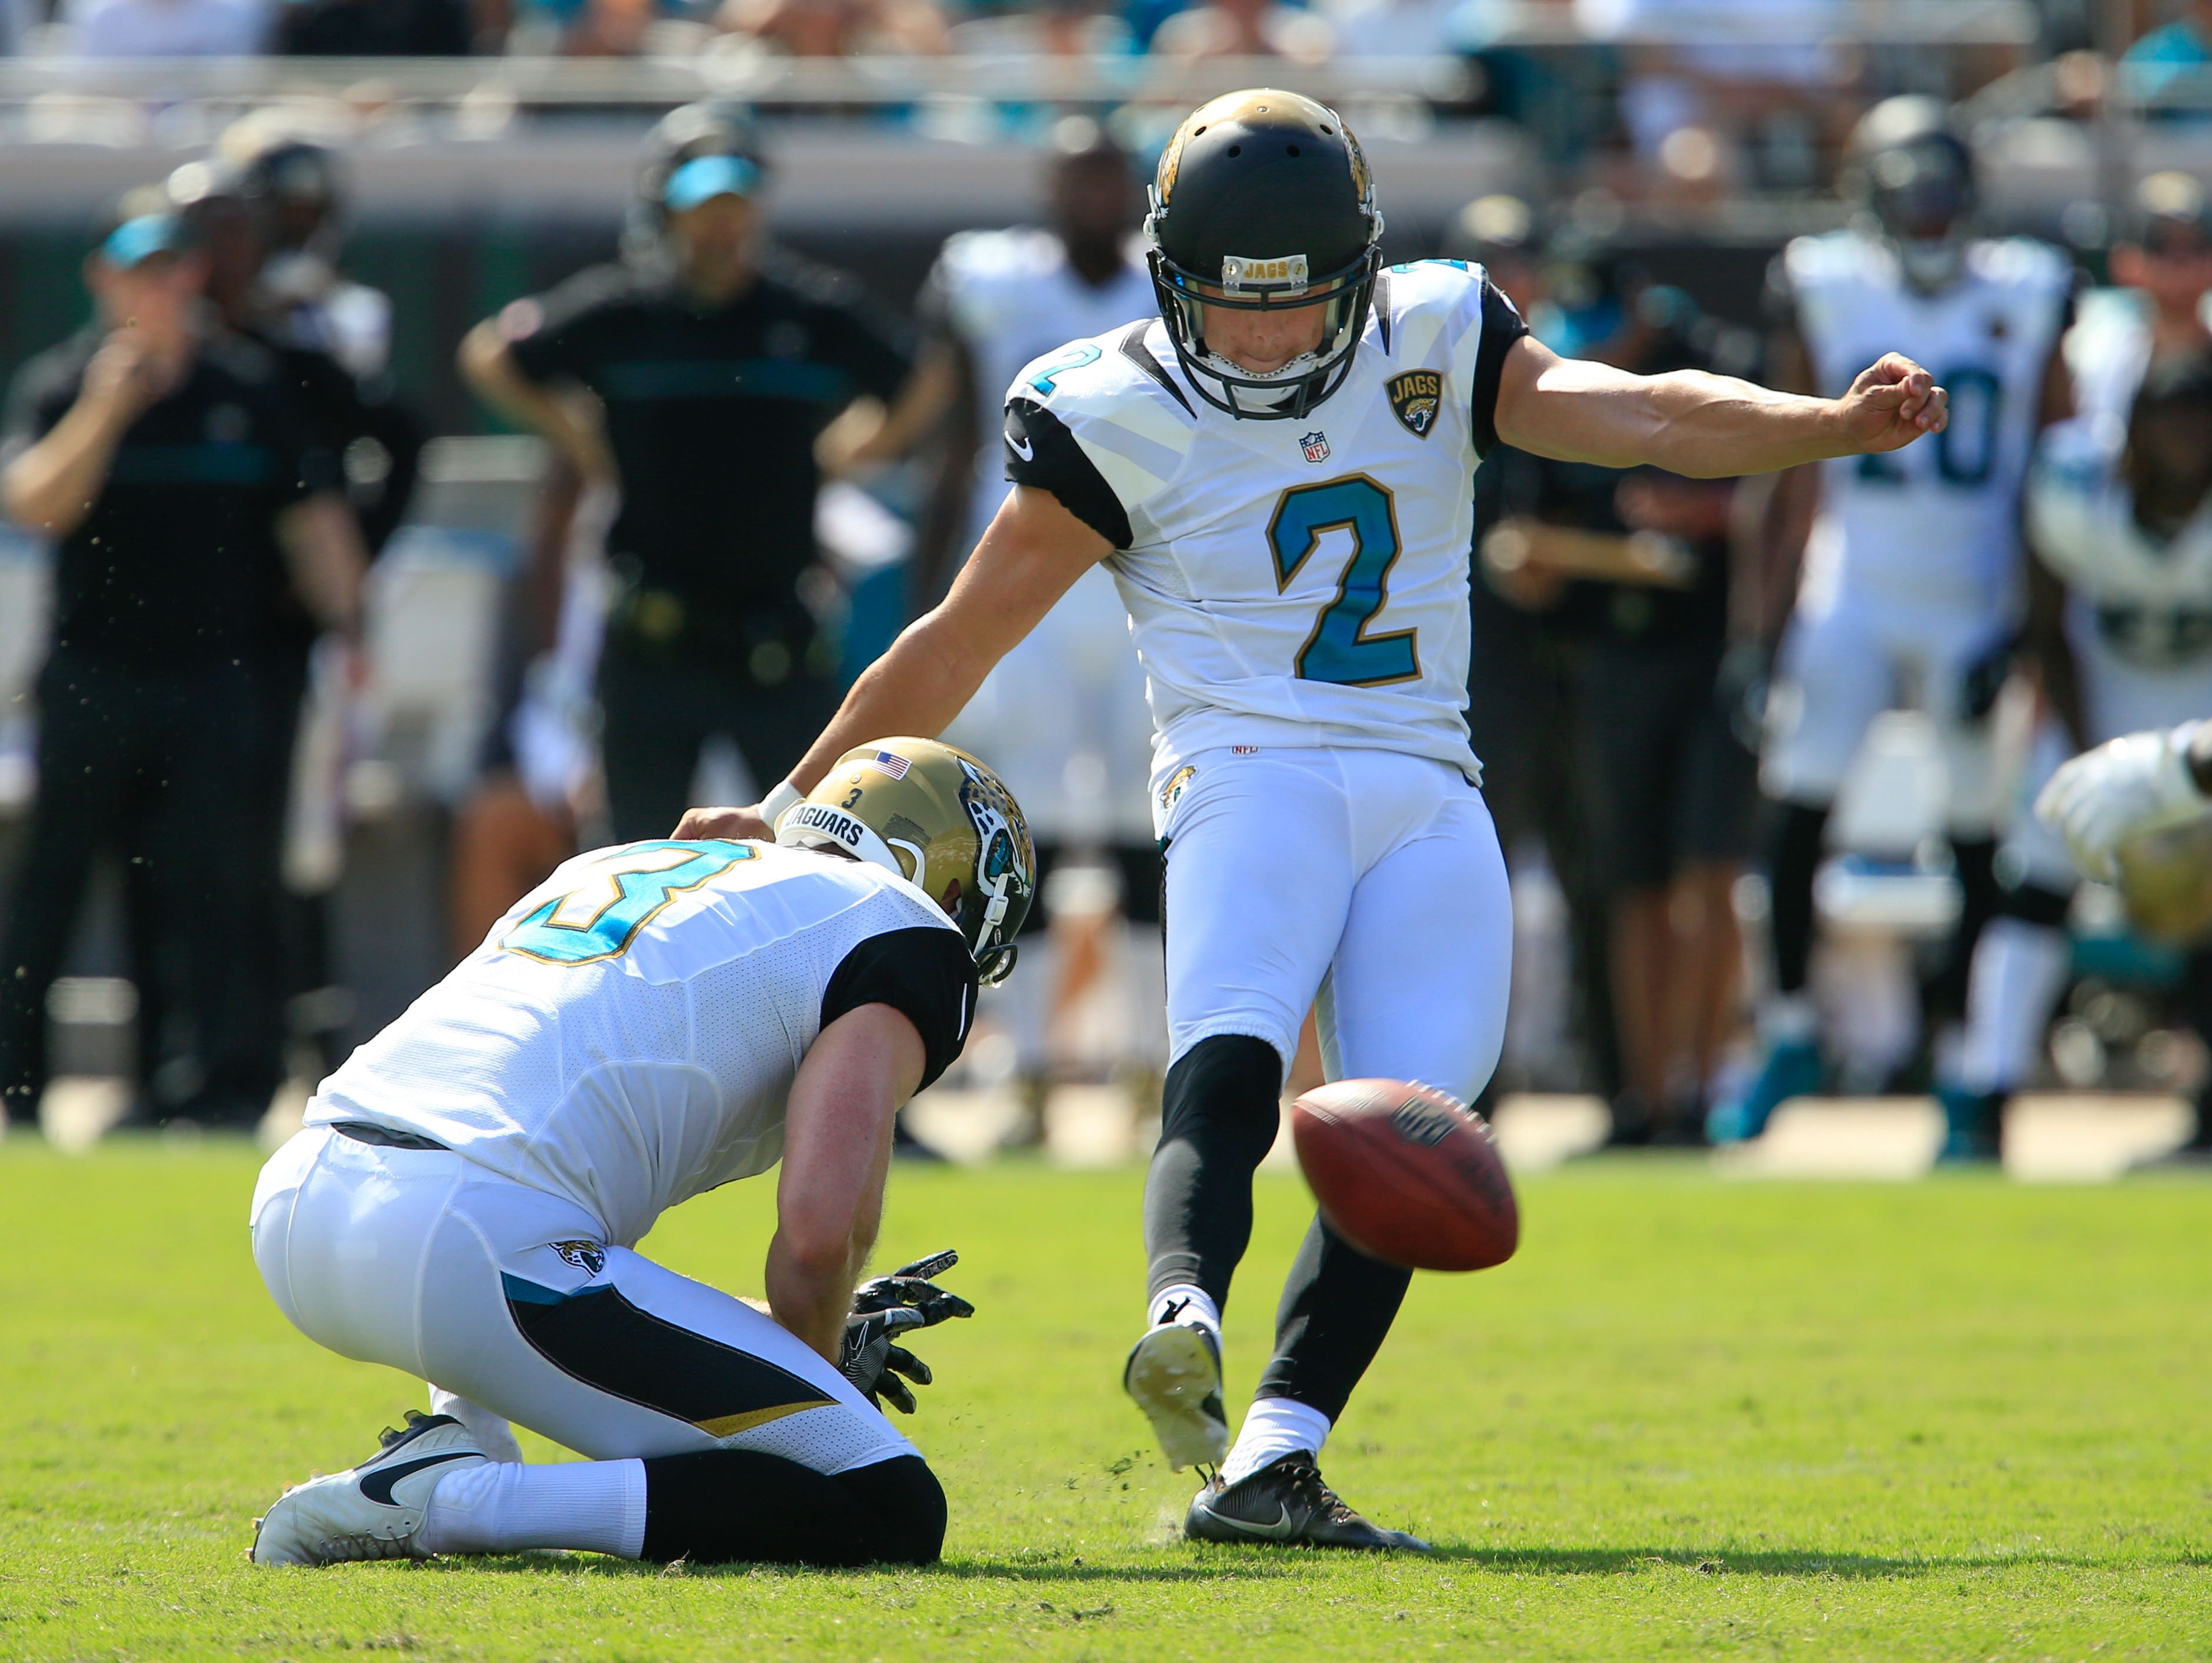 Jacksonville Jaguars kicker Jason Myers kicks a field goal from the hold of Jacksonville Jaguars punter Brad Nortman during the second half of a football game at EverBank Field on Sept. 25. The Baltimore Ravens won 19-17.